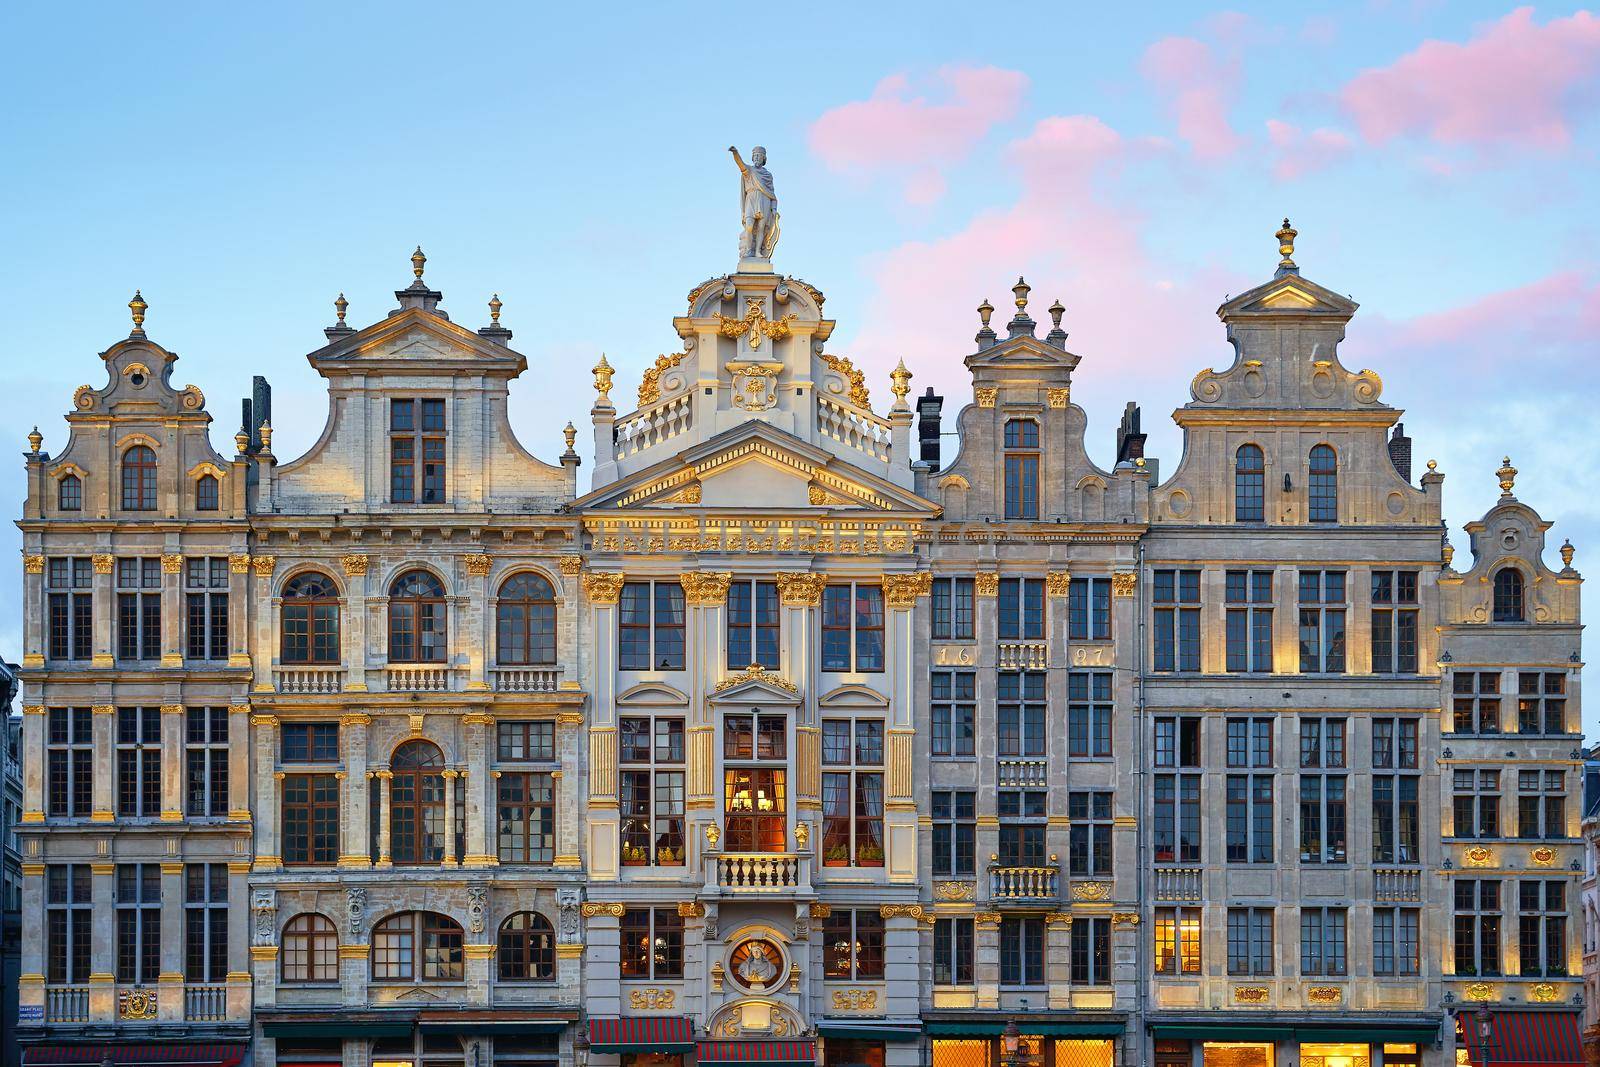 Brussels Grand Place. North-east part. Row of old beautiful stone buildings facades.